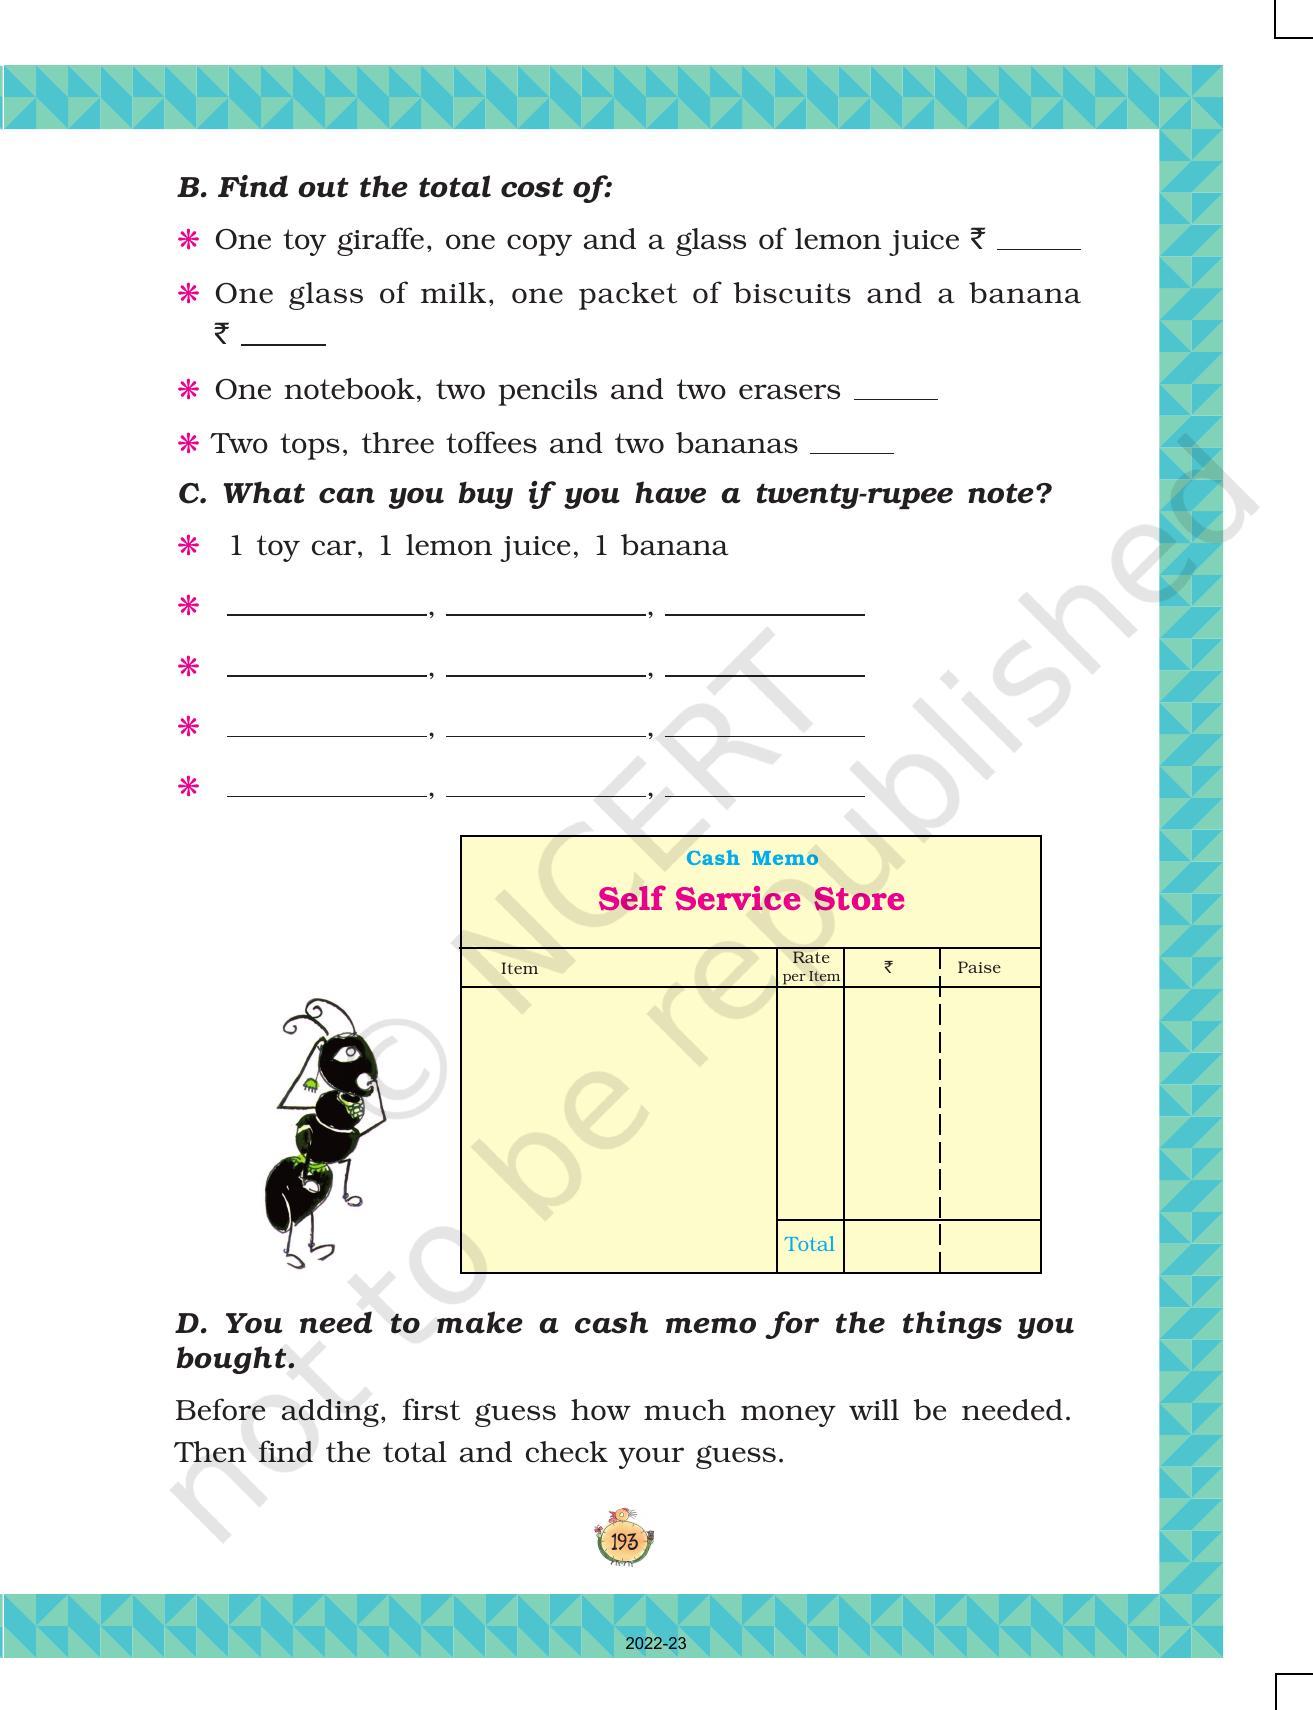 NCERT Book for Class 3 Maths Chapter 14-Rupees and Paise - Page 6